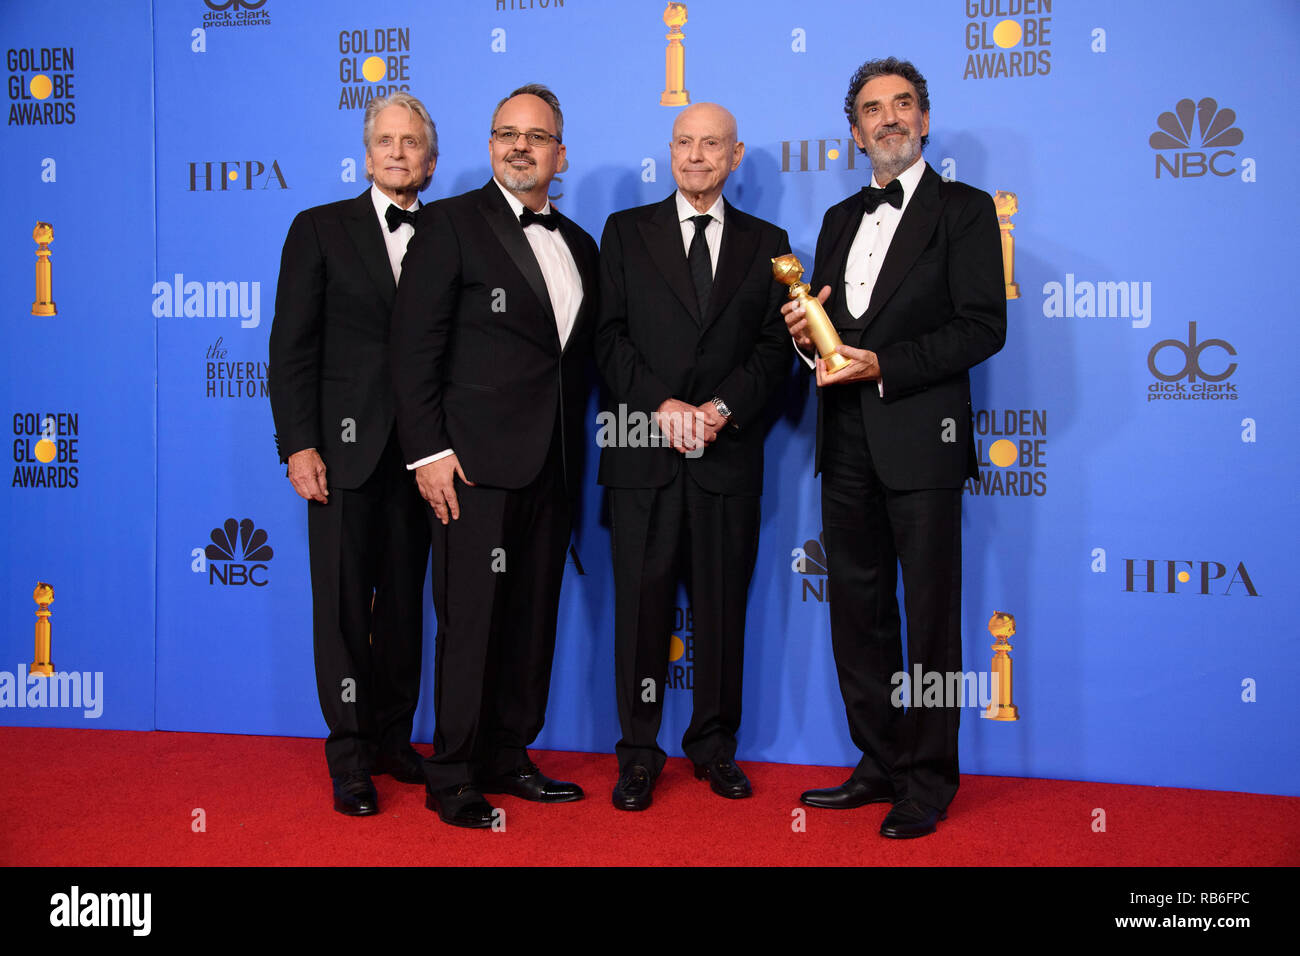 Beverly Hills, USA. 06th Jan, 2019. For BEST TELEVISION SERIES - MUSICAL OR COMEDY, the Golden Globe is awarded to 'The Kominsky Method' (Netflix). Michael Douglas, Al Higgins, Alan Arkin and Chuck Lorre pose with the award backstage in the press room at the 76th Annual Golden Globe Awards at the Beverly Hilton in Beverly Hills, CA on Sunday, January 6, 2019. Credit: PictureLux/The Hollywood Archive/Alamy Live News Stock Photo